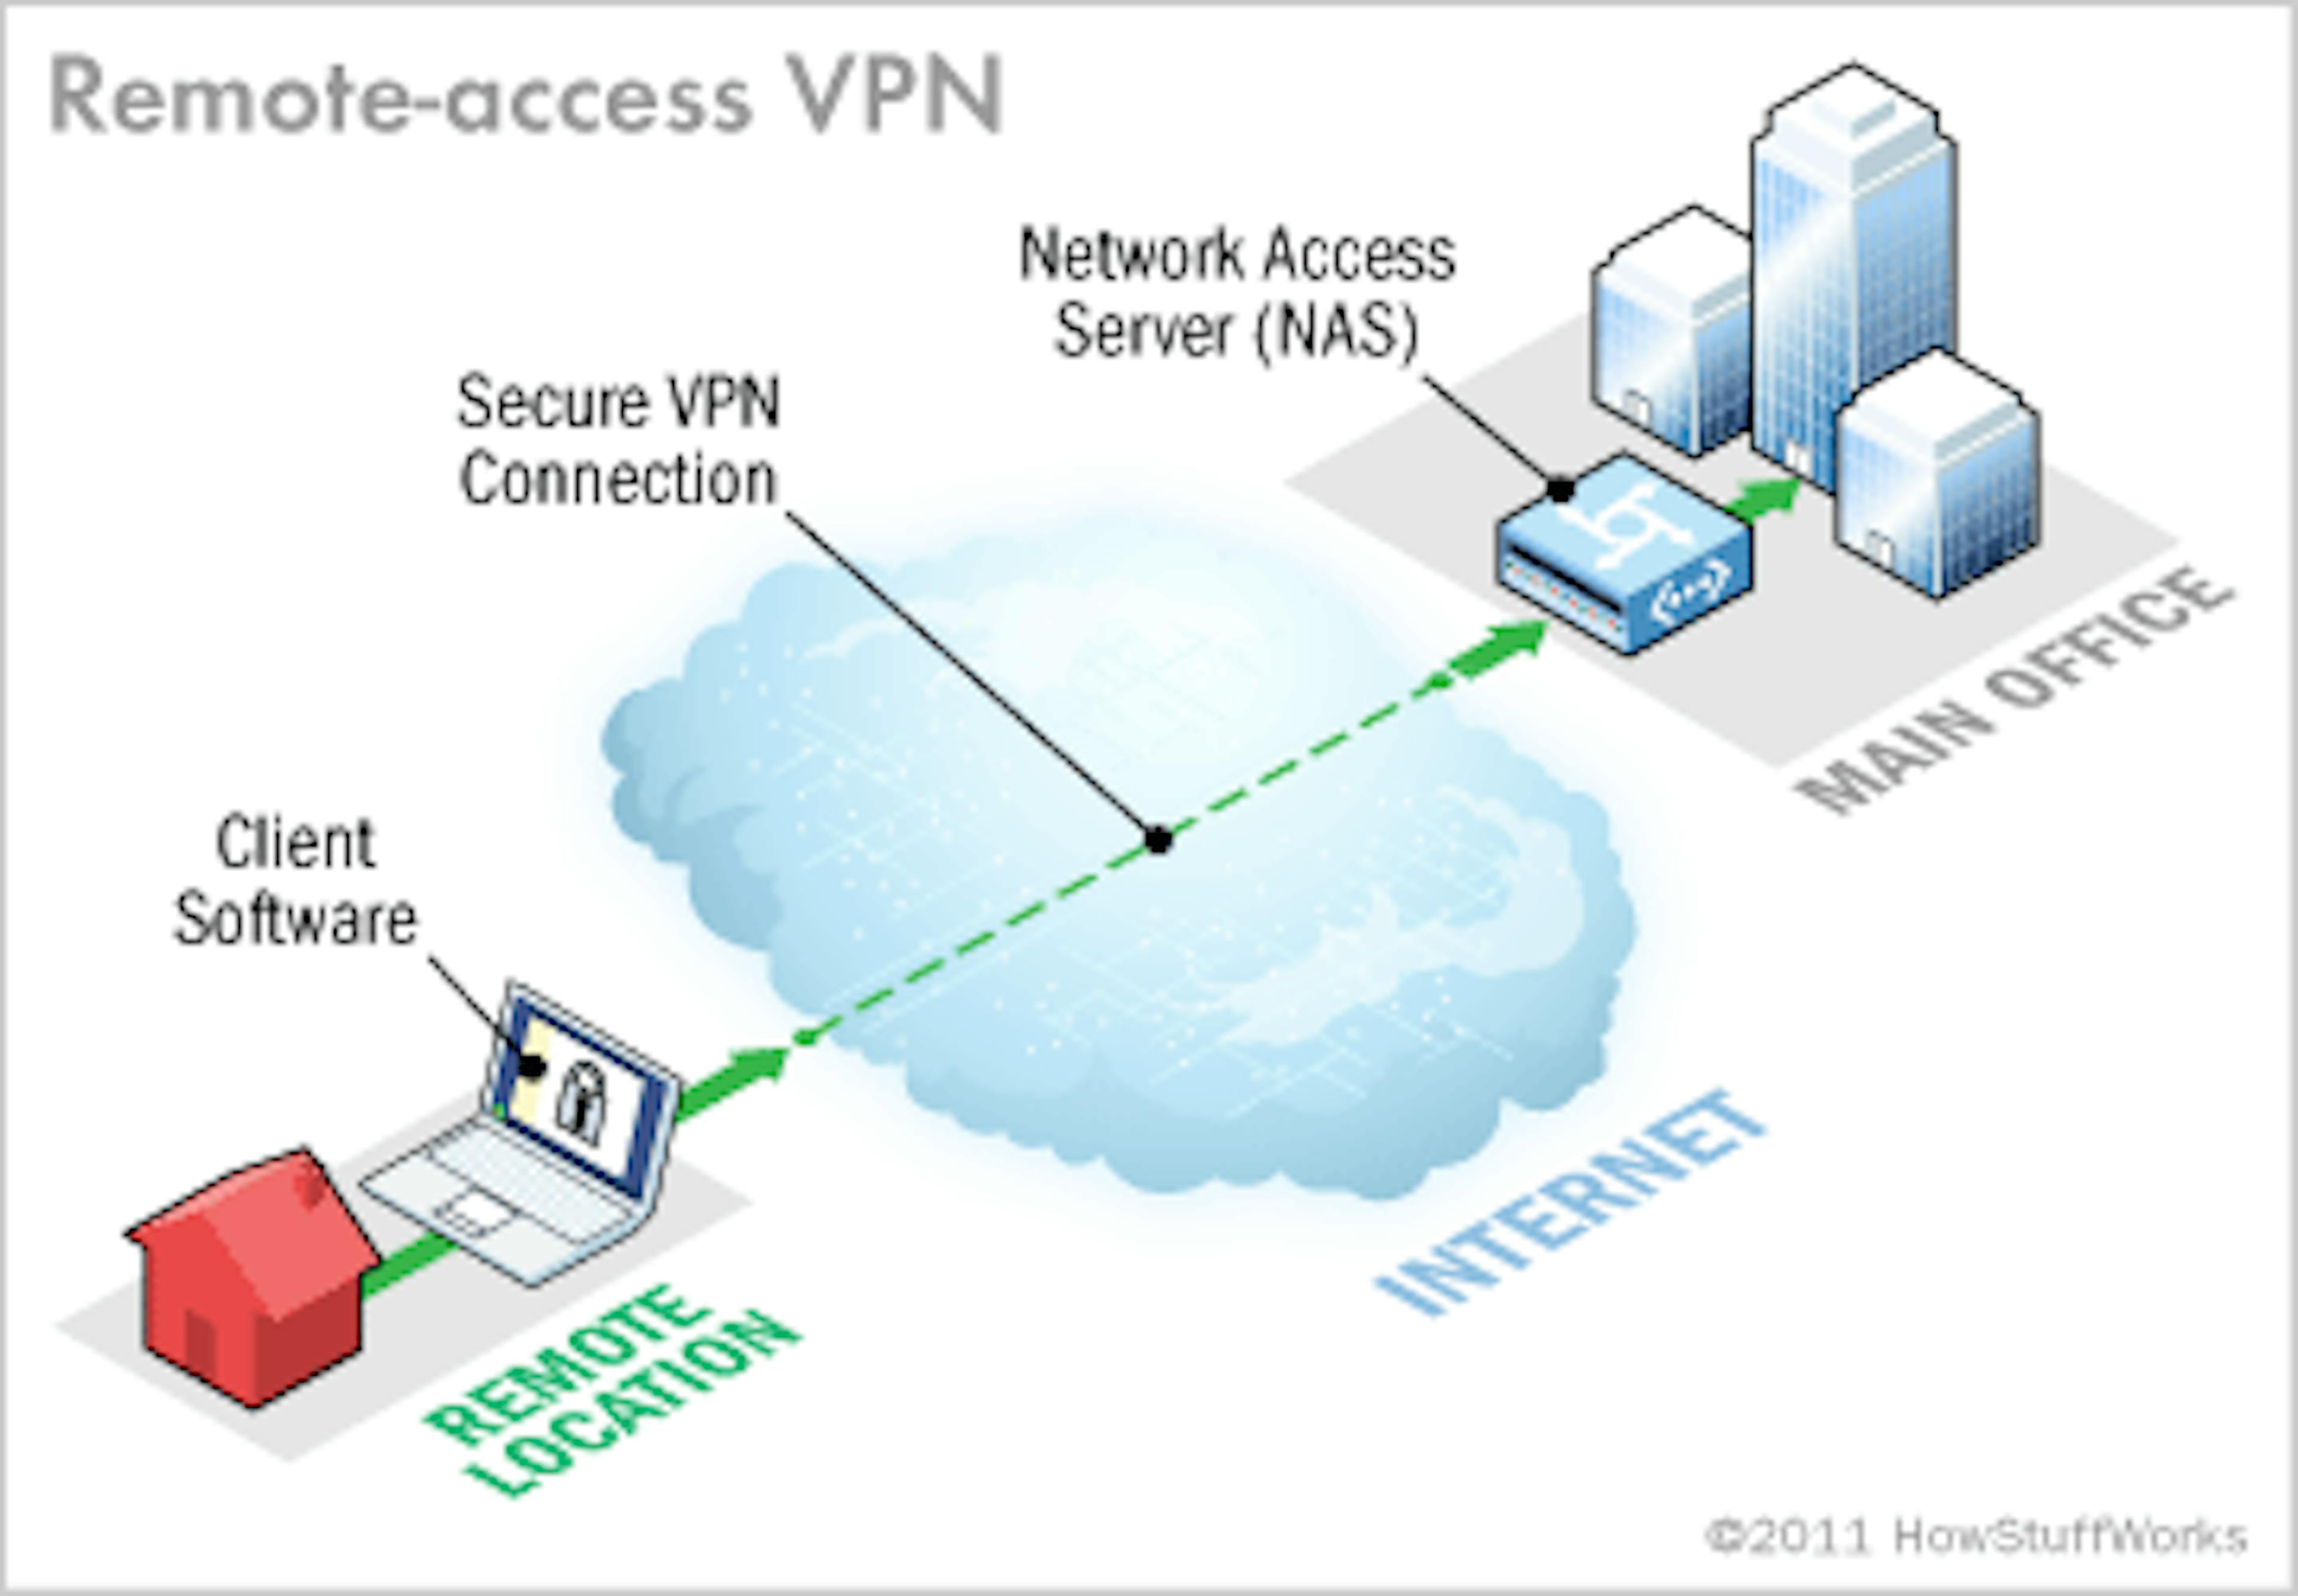 /using-a-vpn-server-to-connect-to-your-aws-vpc-for-just-the-cost-of-an-ec2-nano-instance-3c81269c71c2 feature image